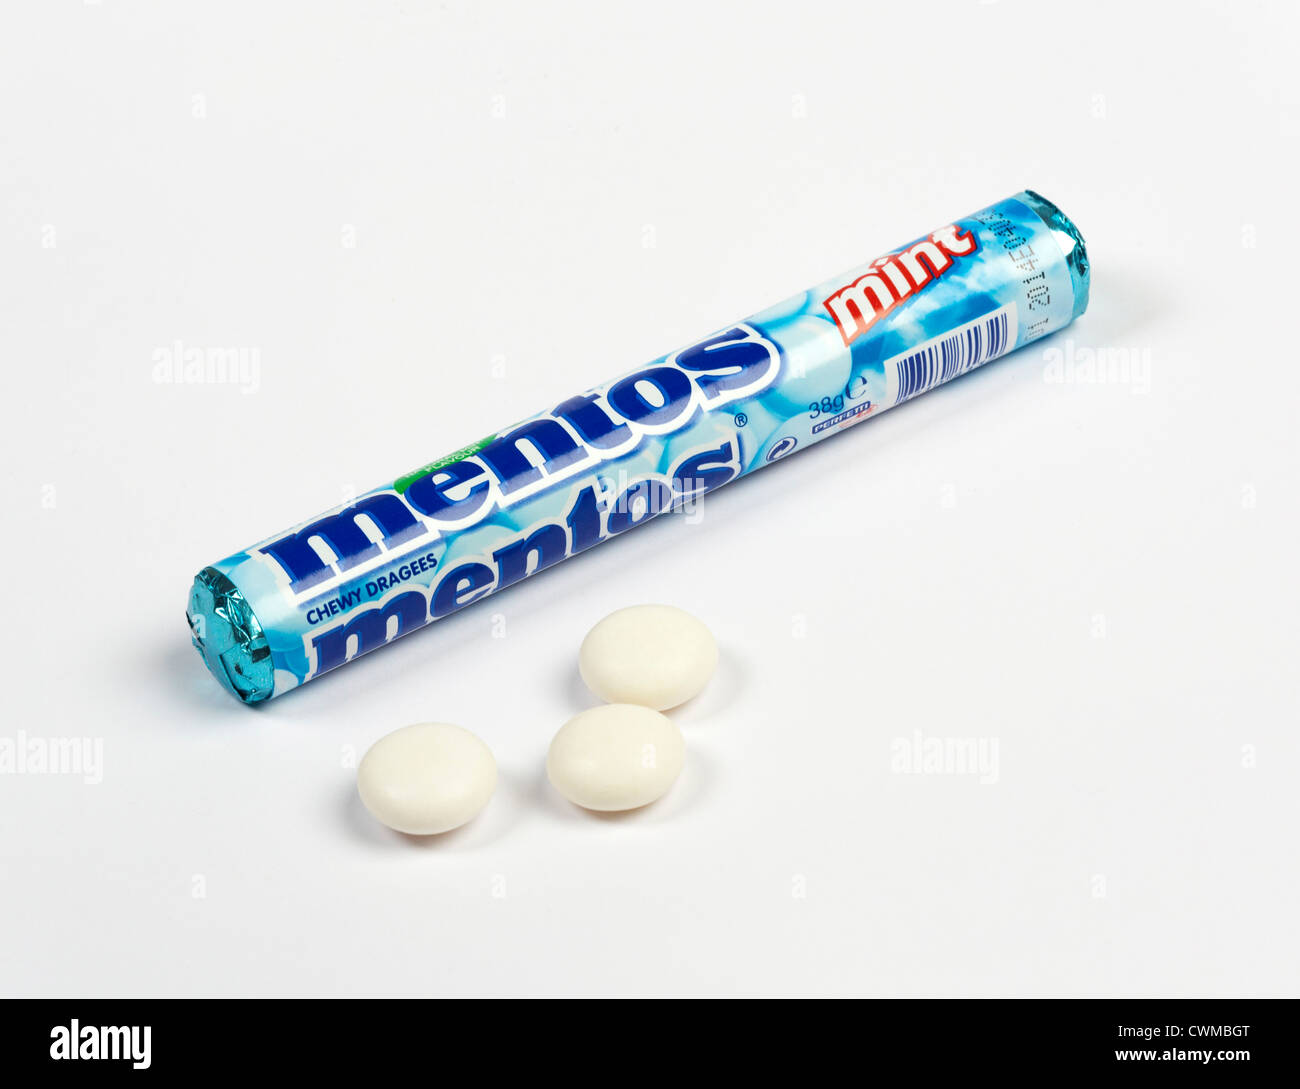 packet of Mentos mints Stock Photo